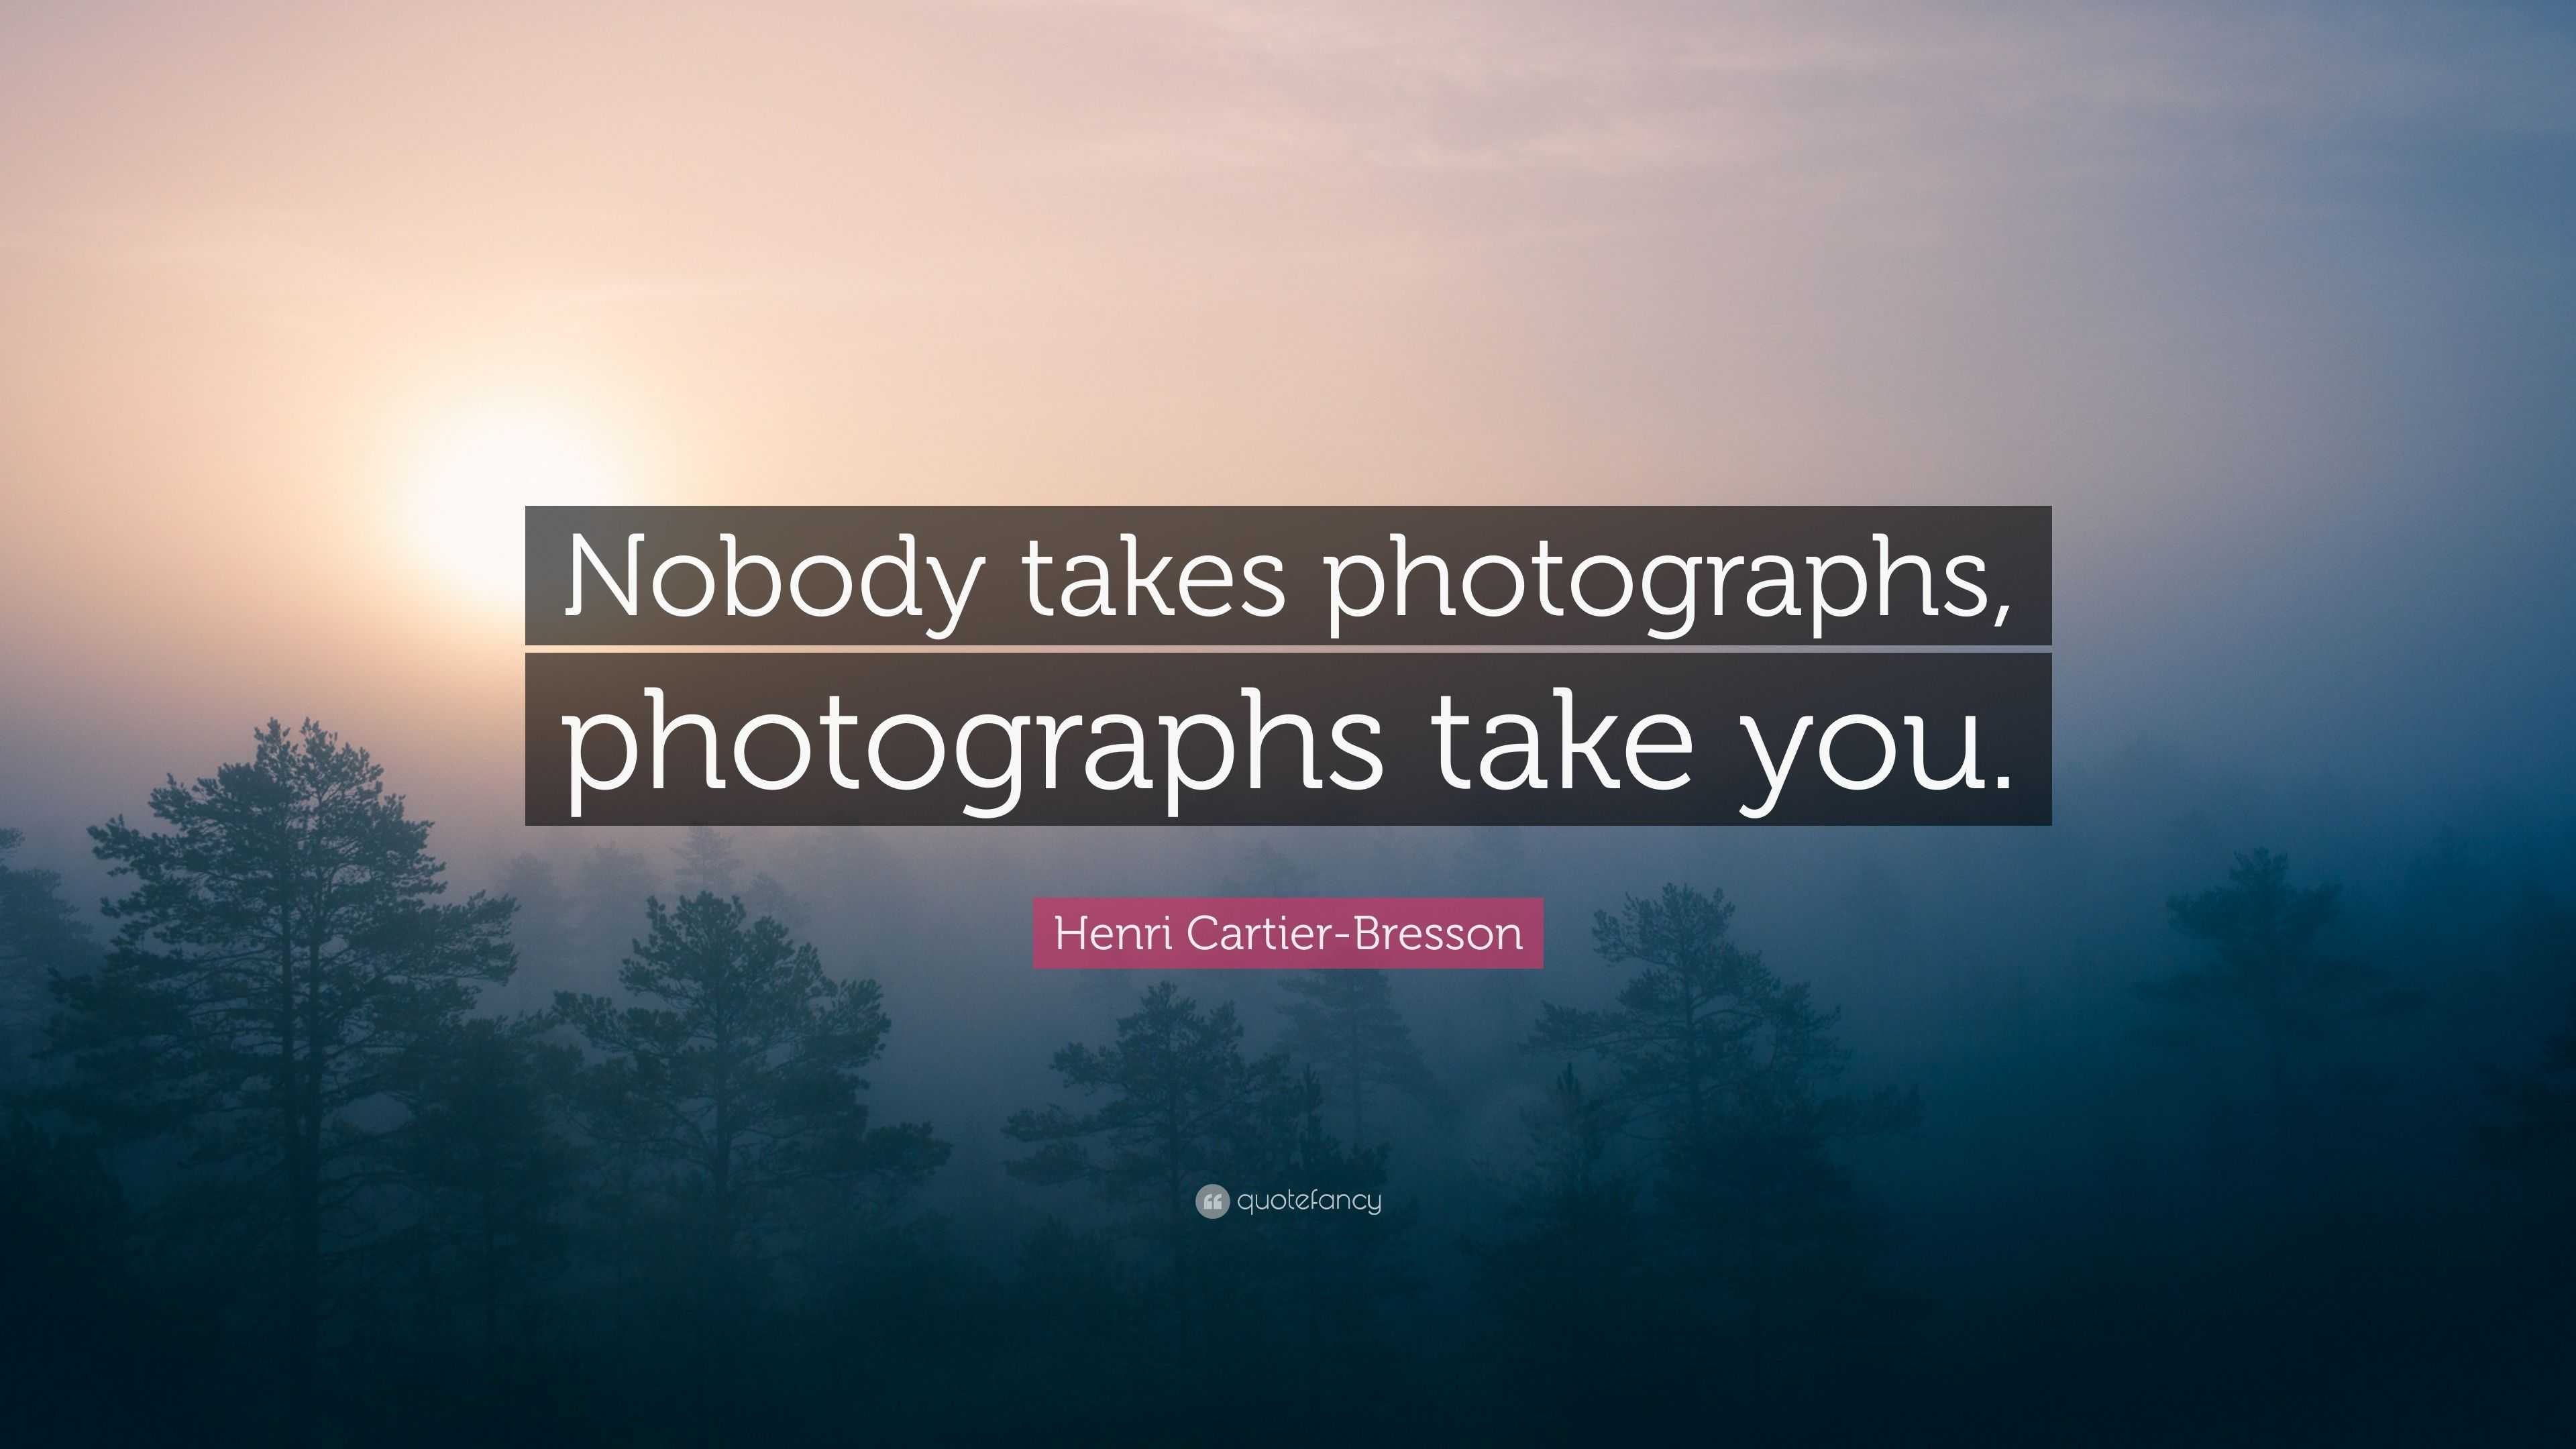 Henri Cartier-Bresson Quote: “Nobody takes photographs, photographs ...